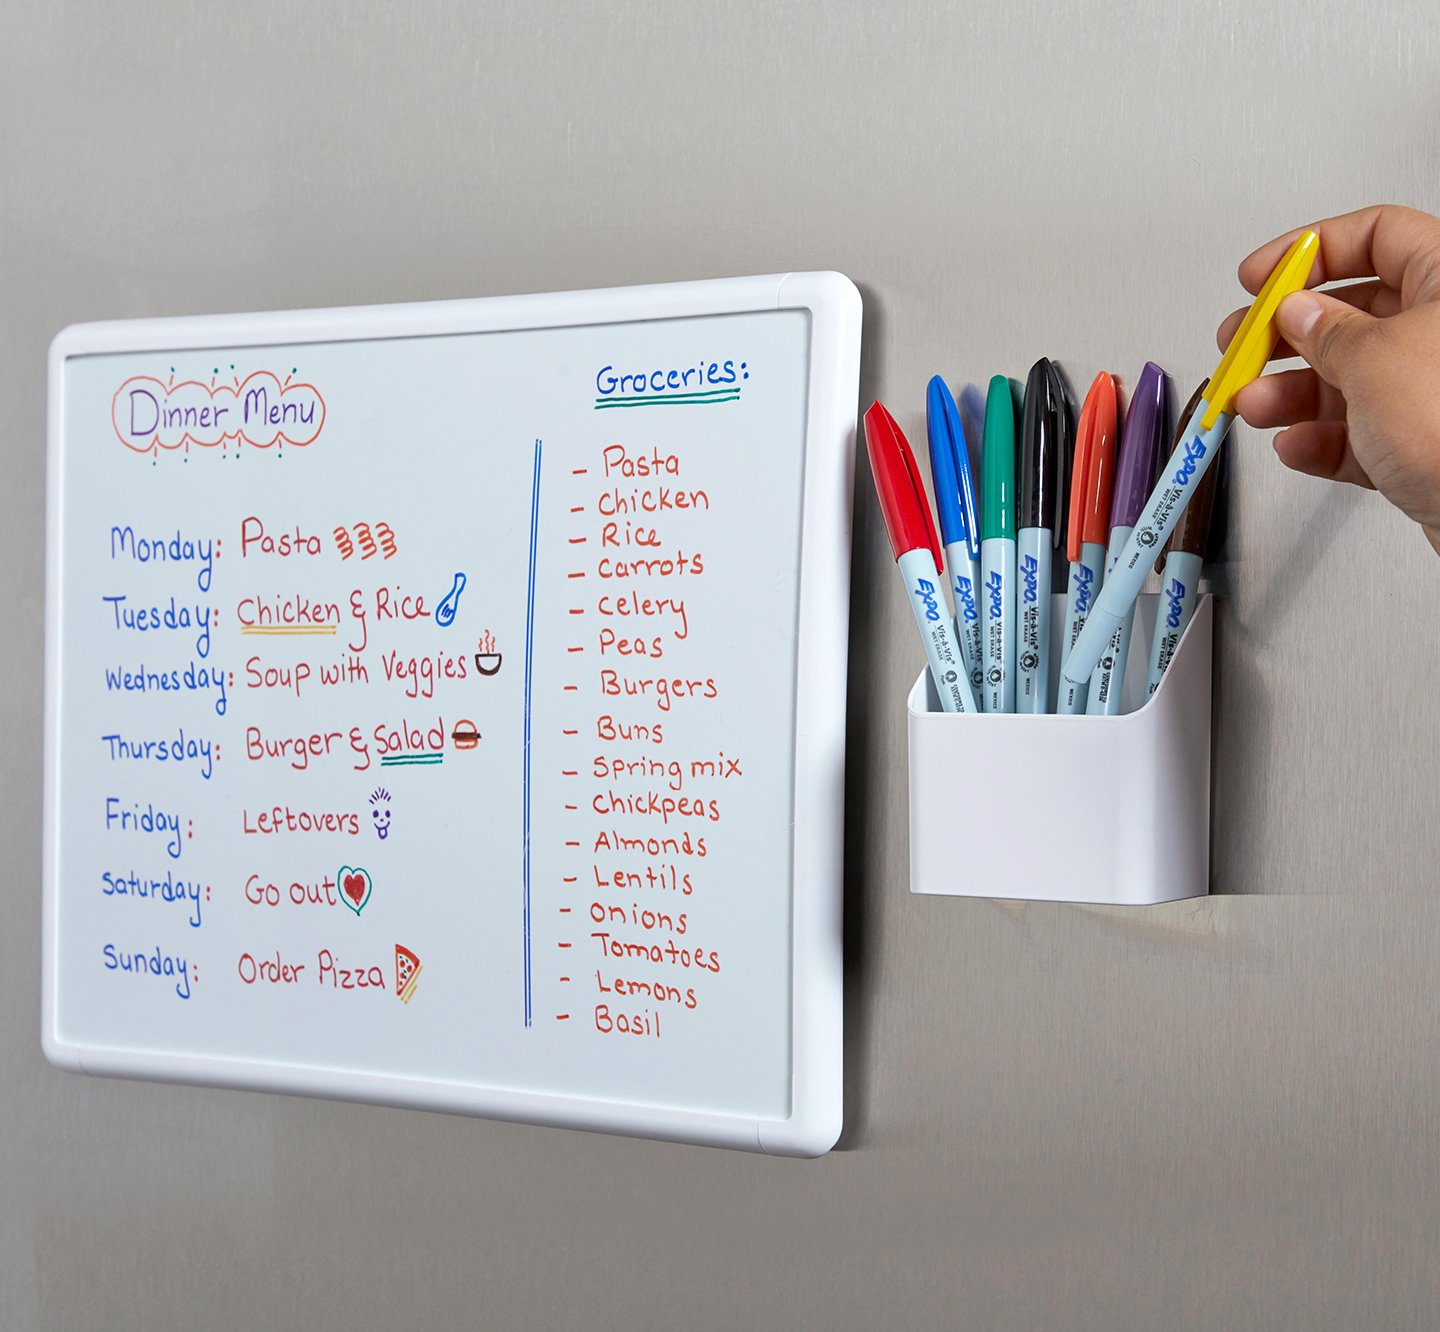 Magnetic Write & Wipe Markers with Eraser Caps at Lakeshore Learning